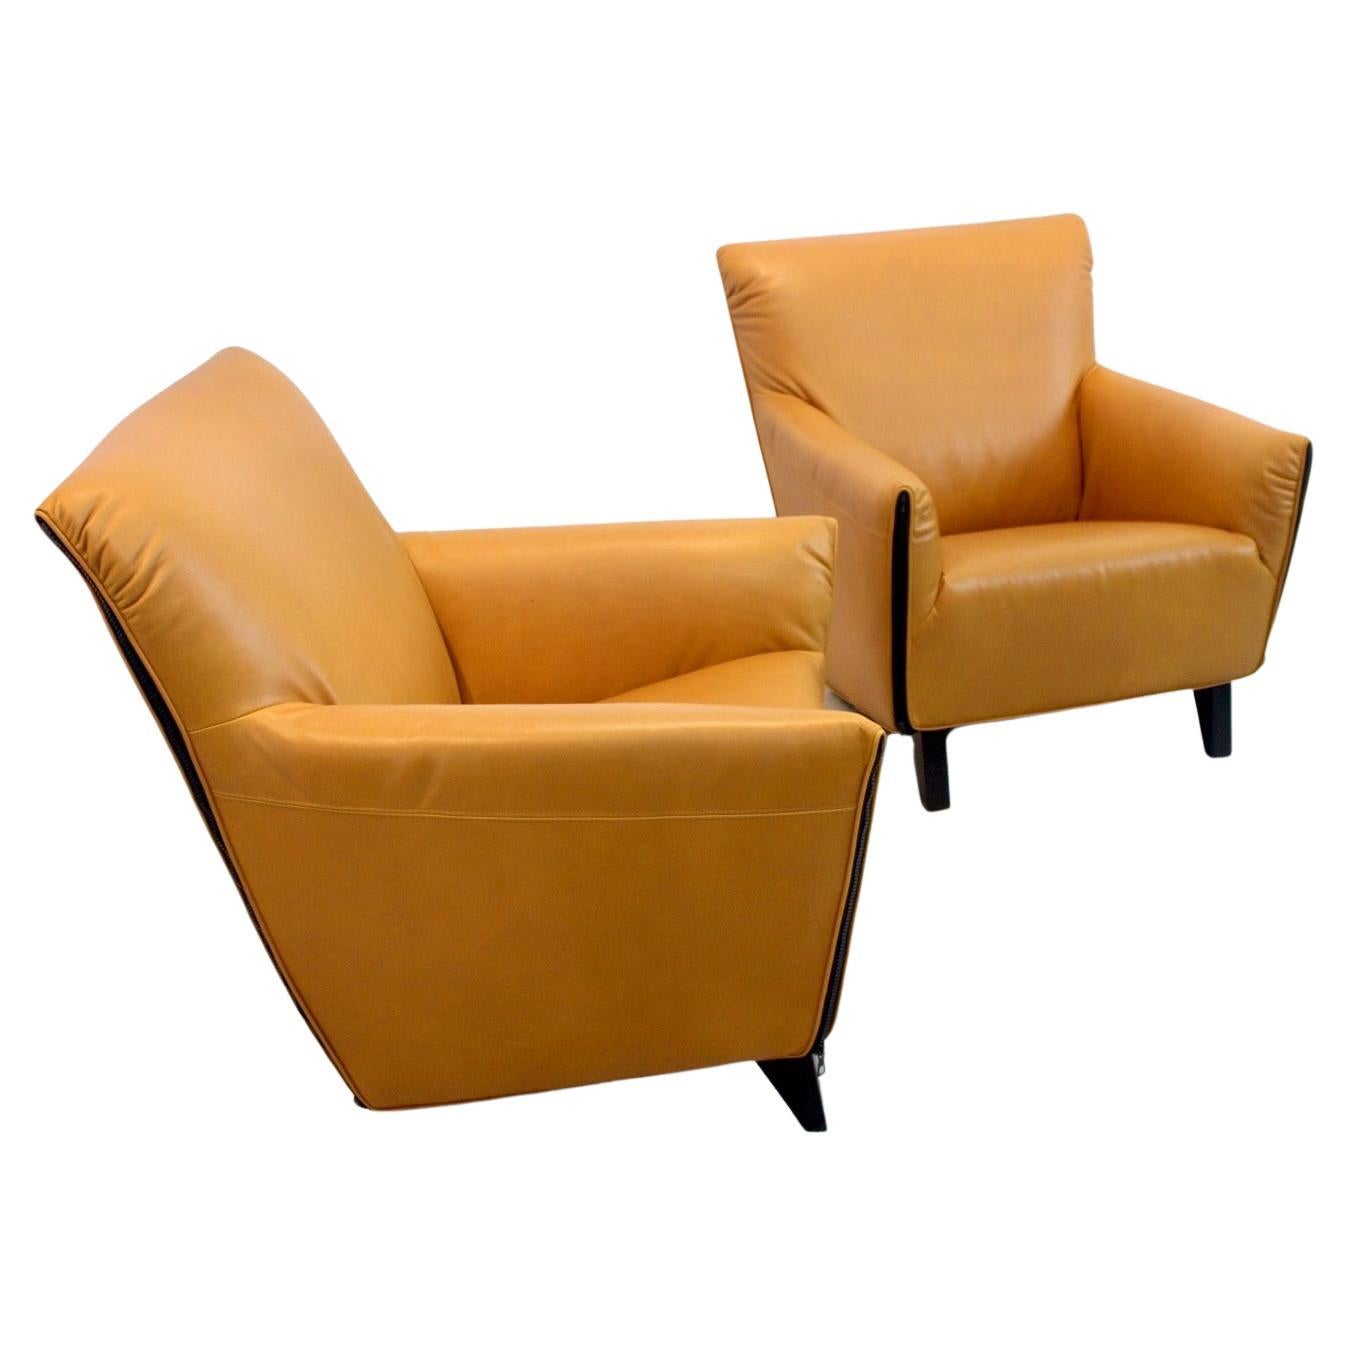 Set of Iconic Artifort F330 ‘Cordoba’ Lounge Chairs in Soft Ochre Leather For Sale